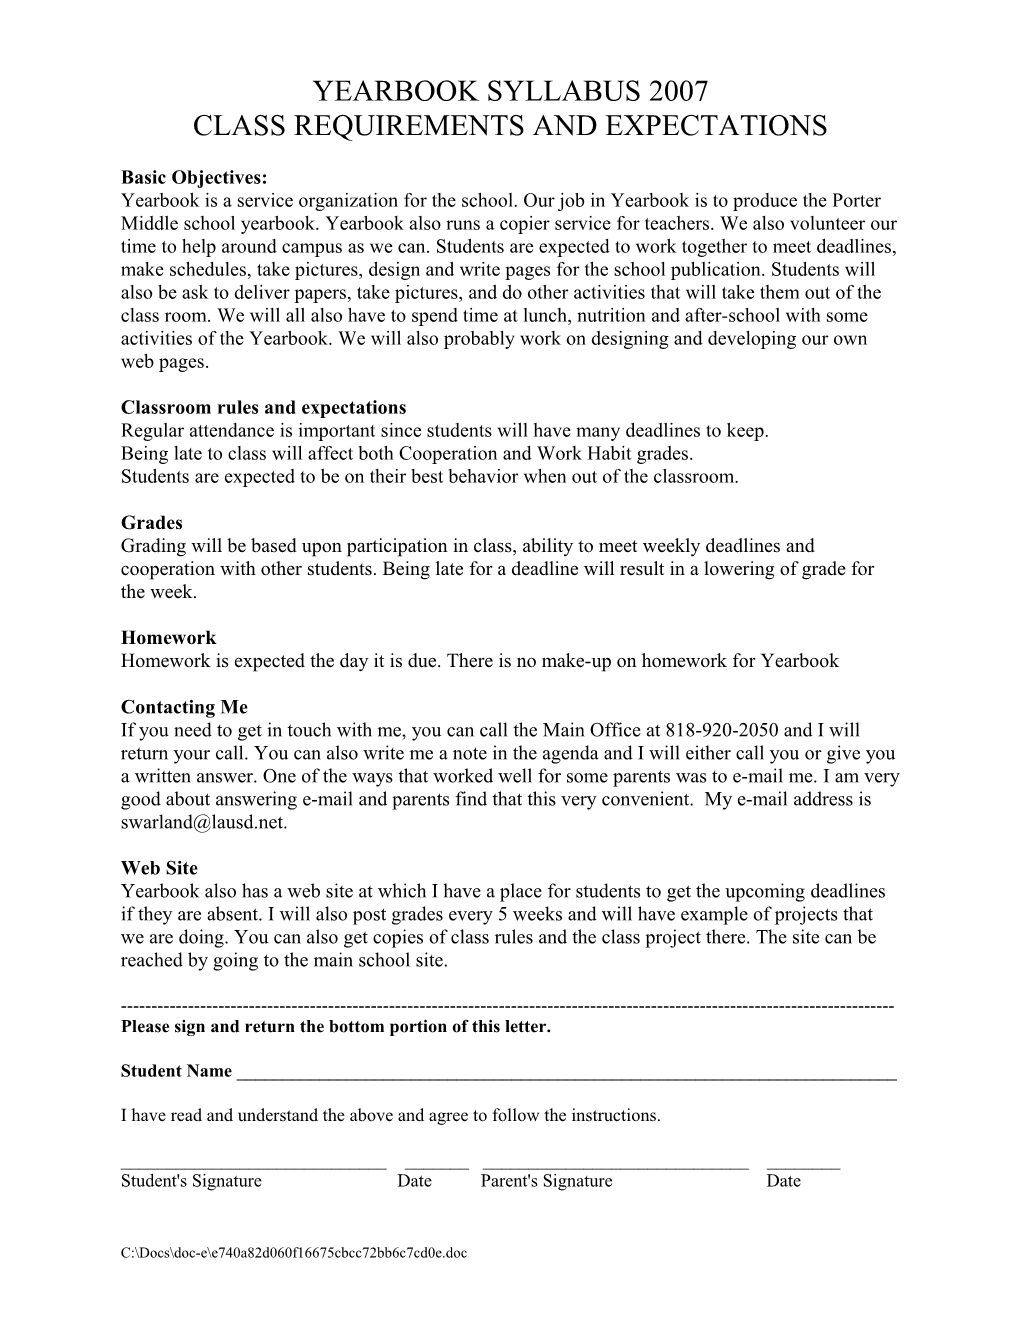 Yearbook Syllabus 2007 Class Requirements and Expectations